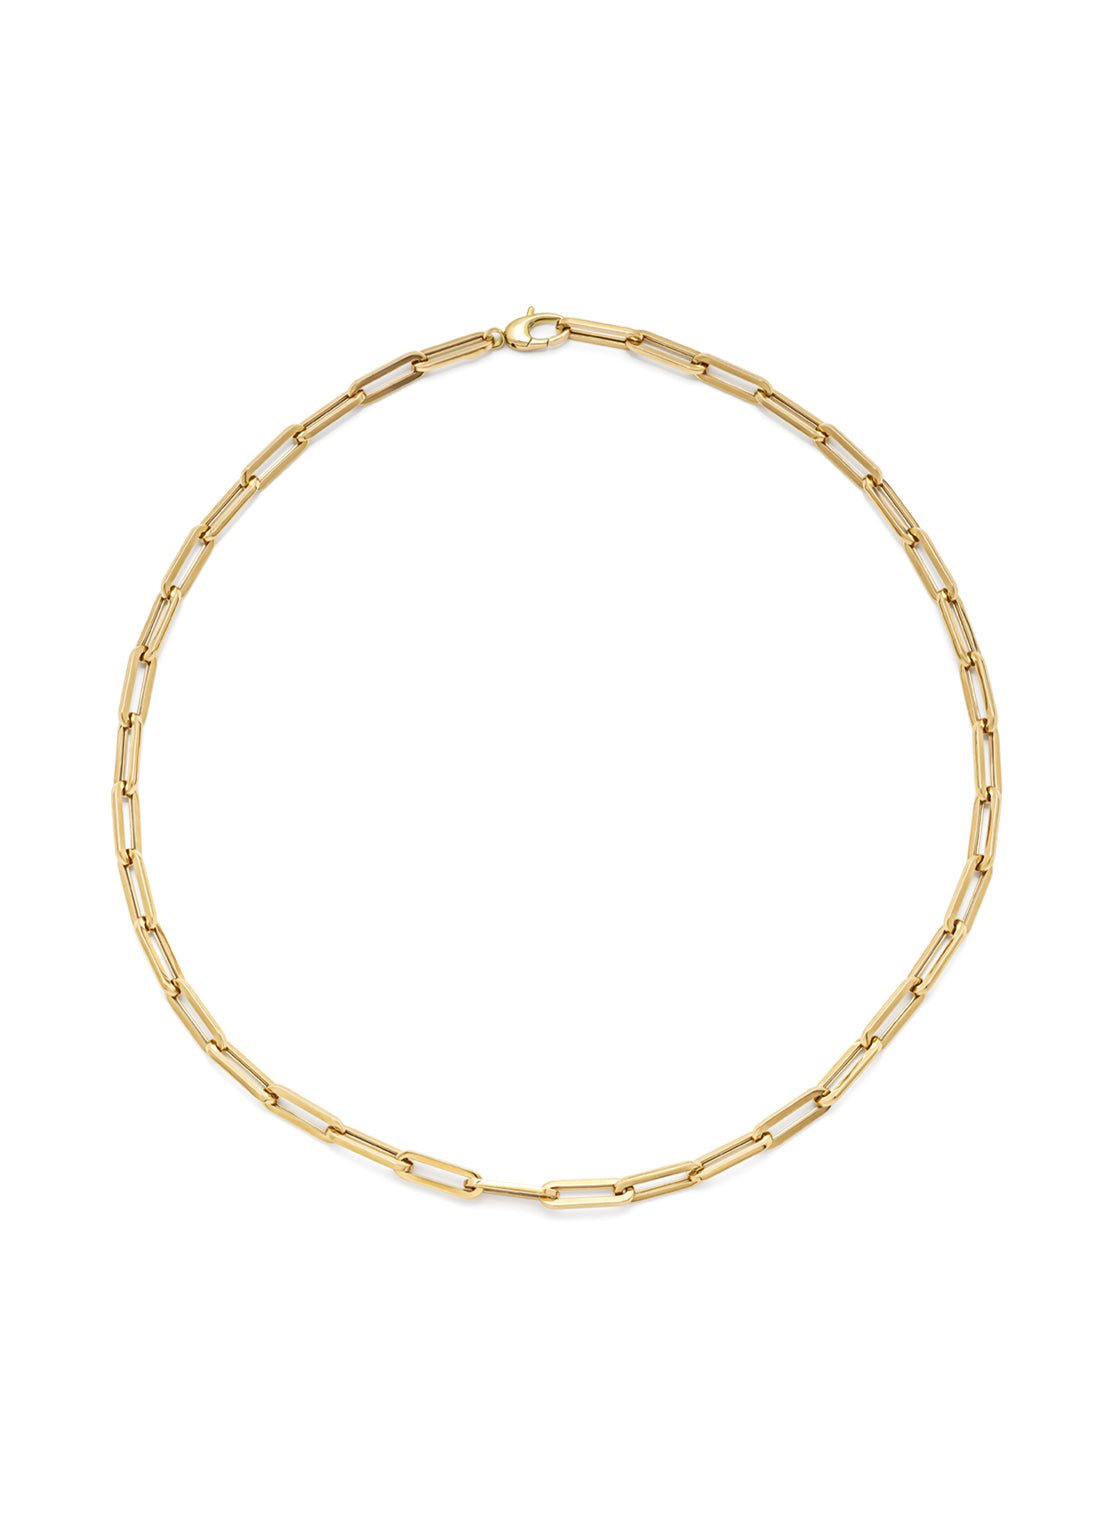 Yellow gold necklace closed forever 45 cm